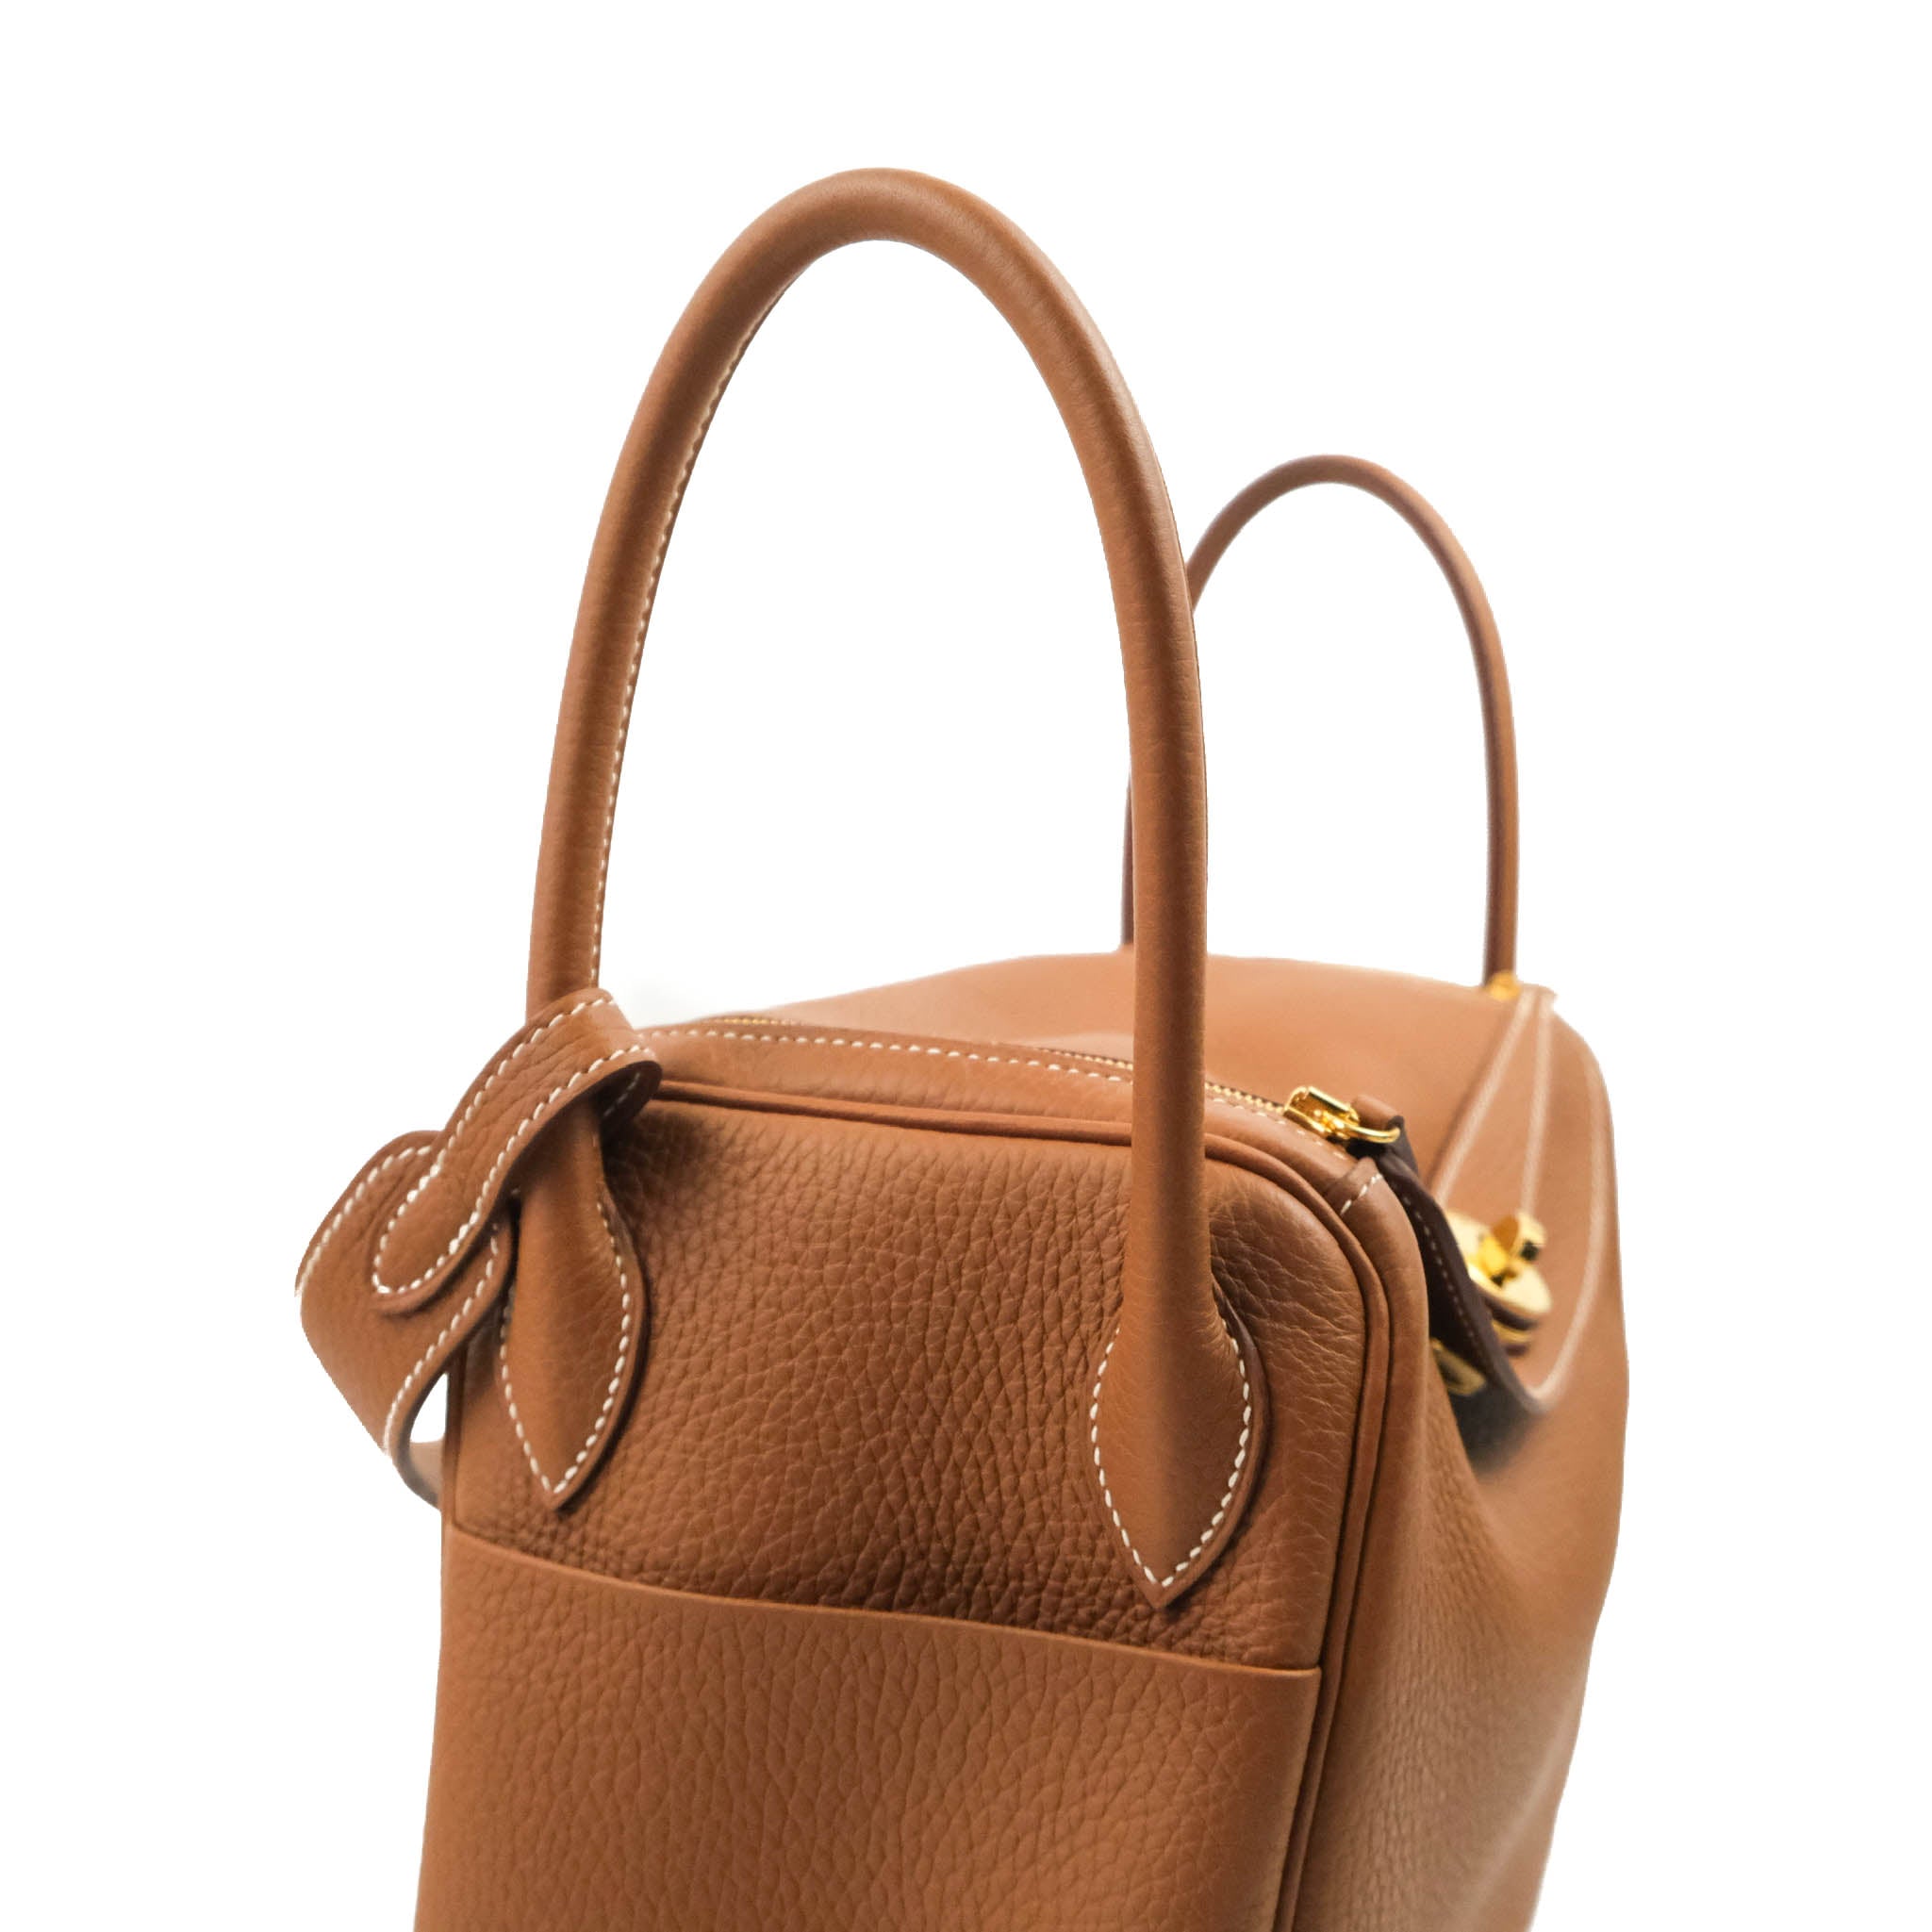 Hermès Lindy 26 Taurillon Clemence Gold Gold Hardware – Coco